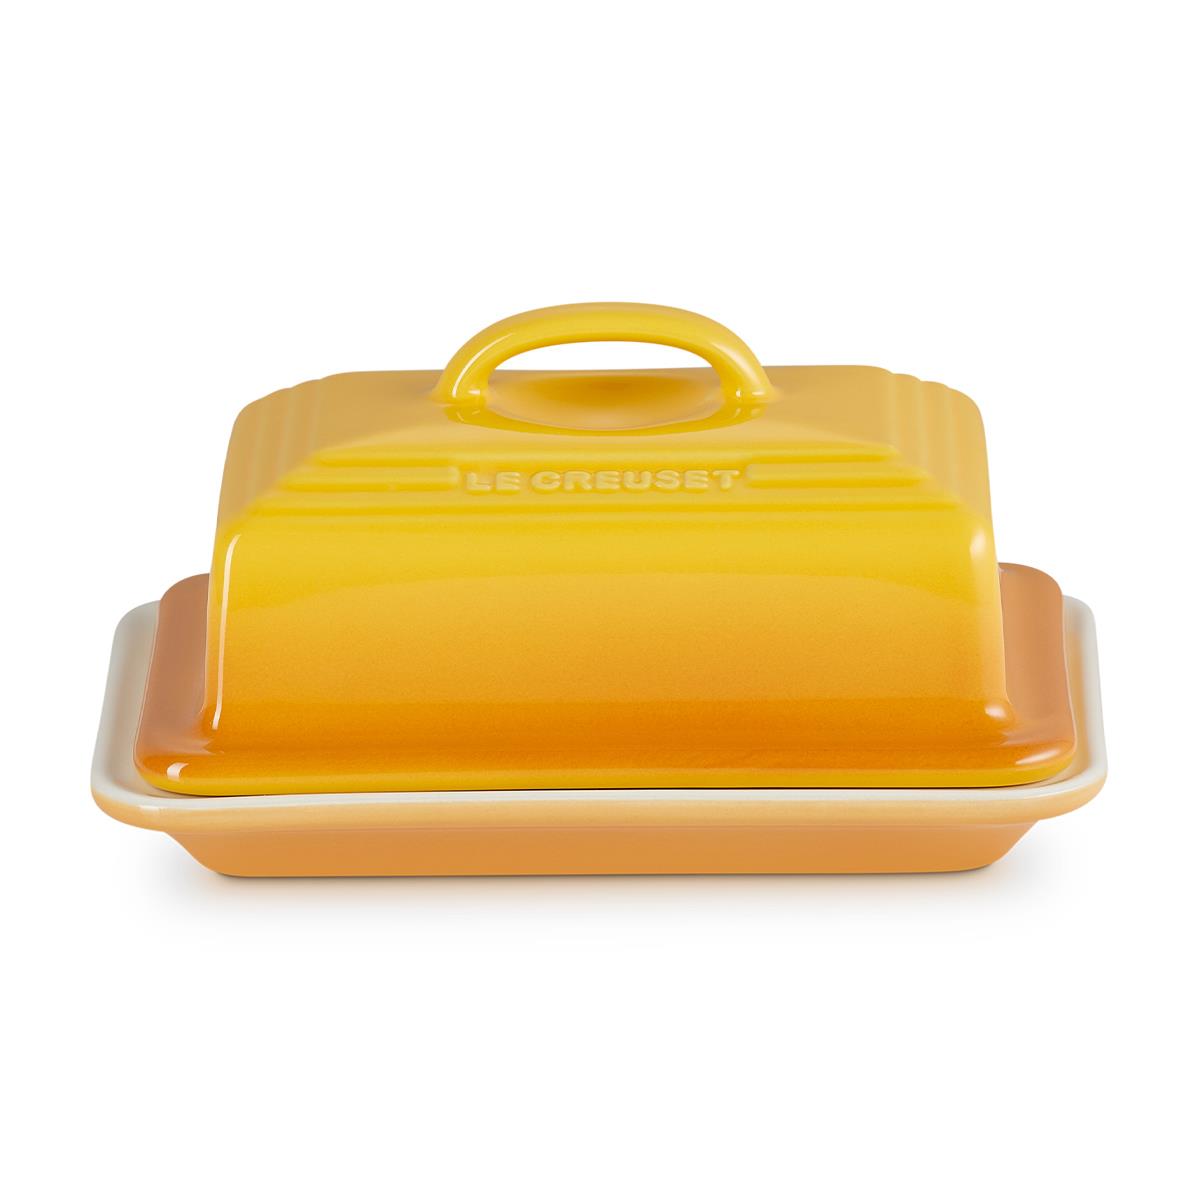 How much does the Le Creuset butter dish with lid weigh?